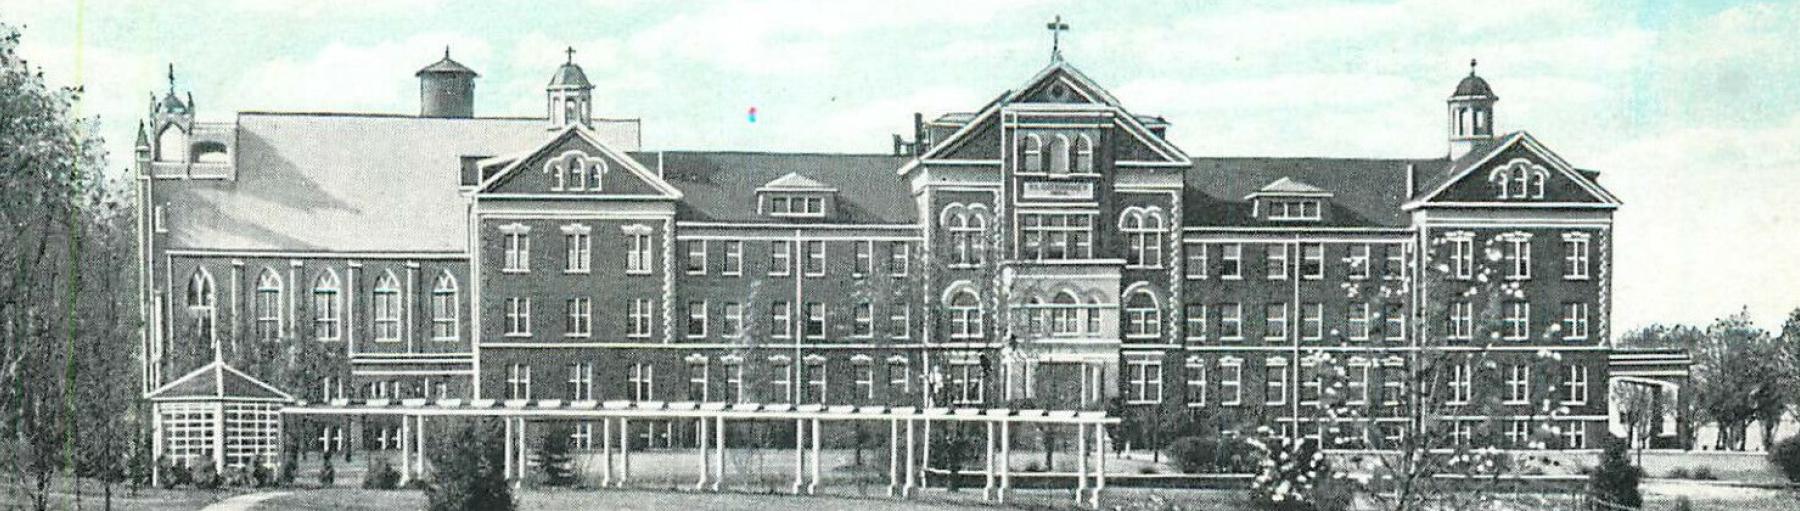 St> Catharine of Siena Convent, Springfield, KY